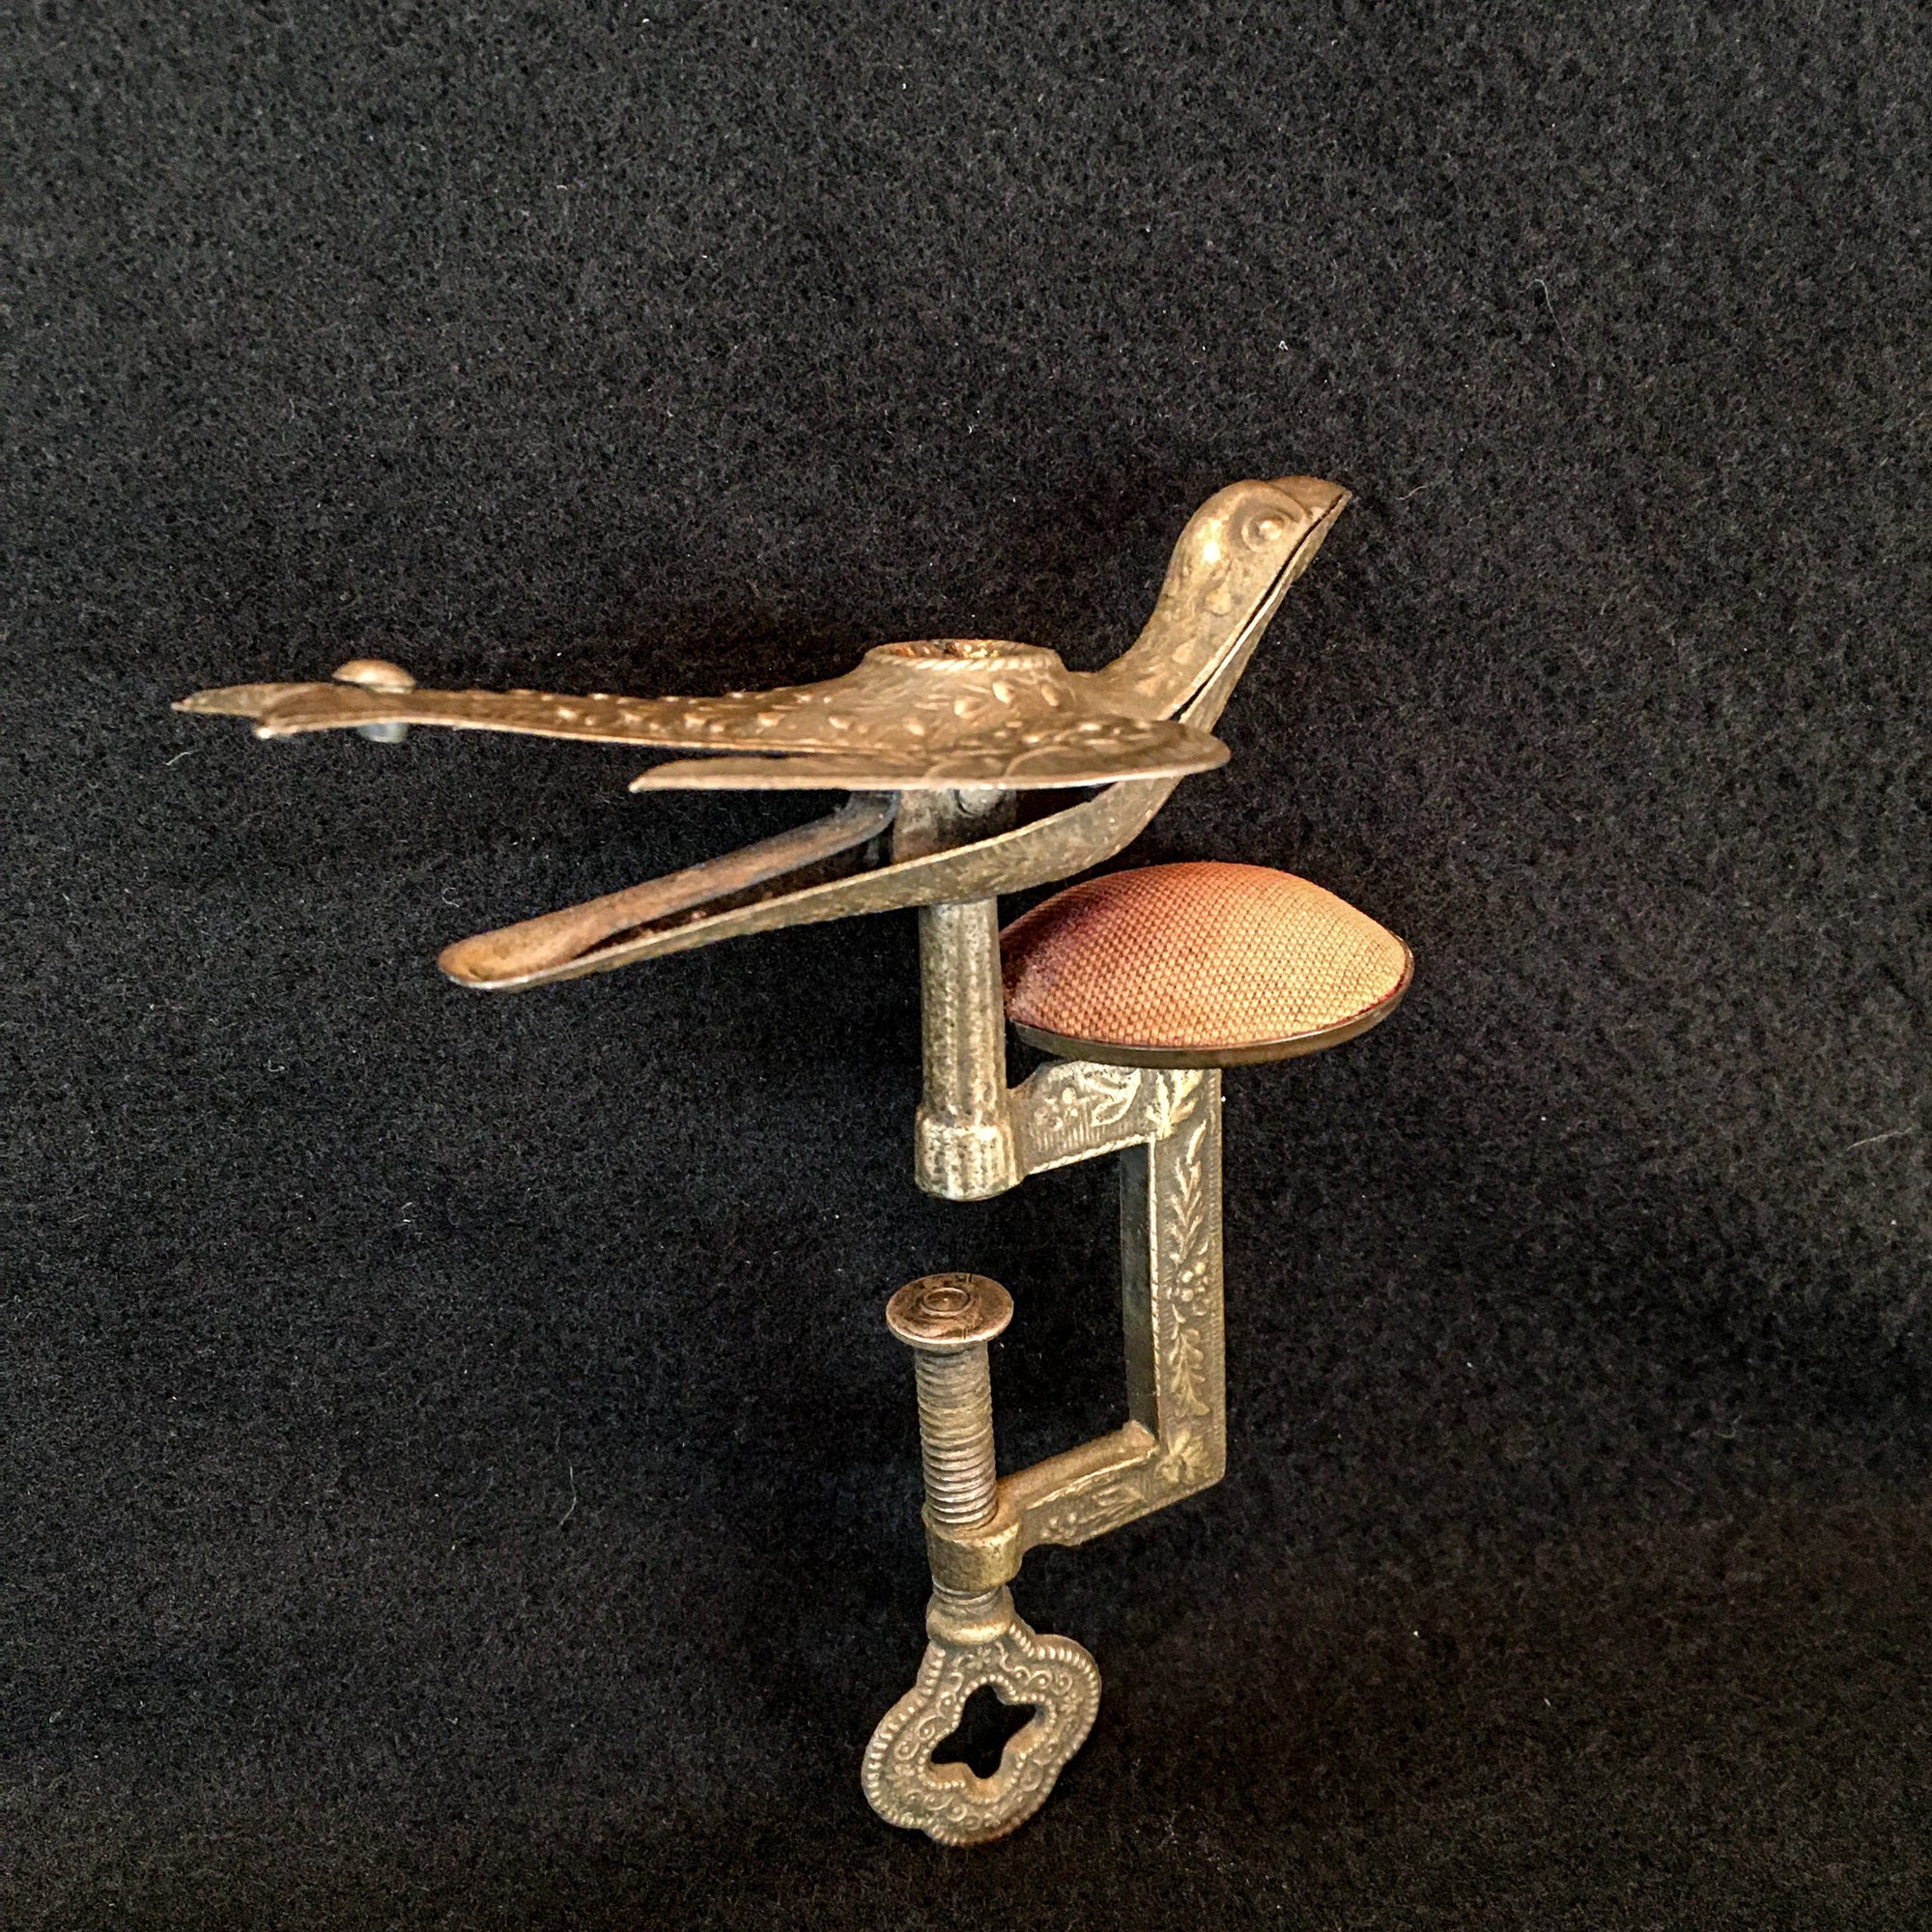 Victorian Sewing Bird, Patented Feb 15, 1853